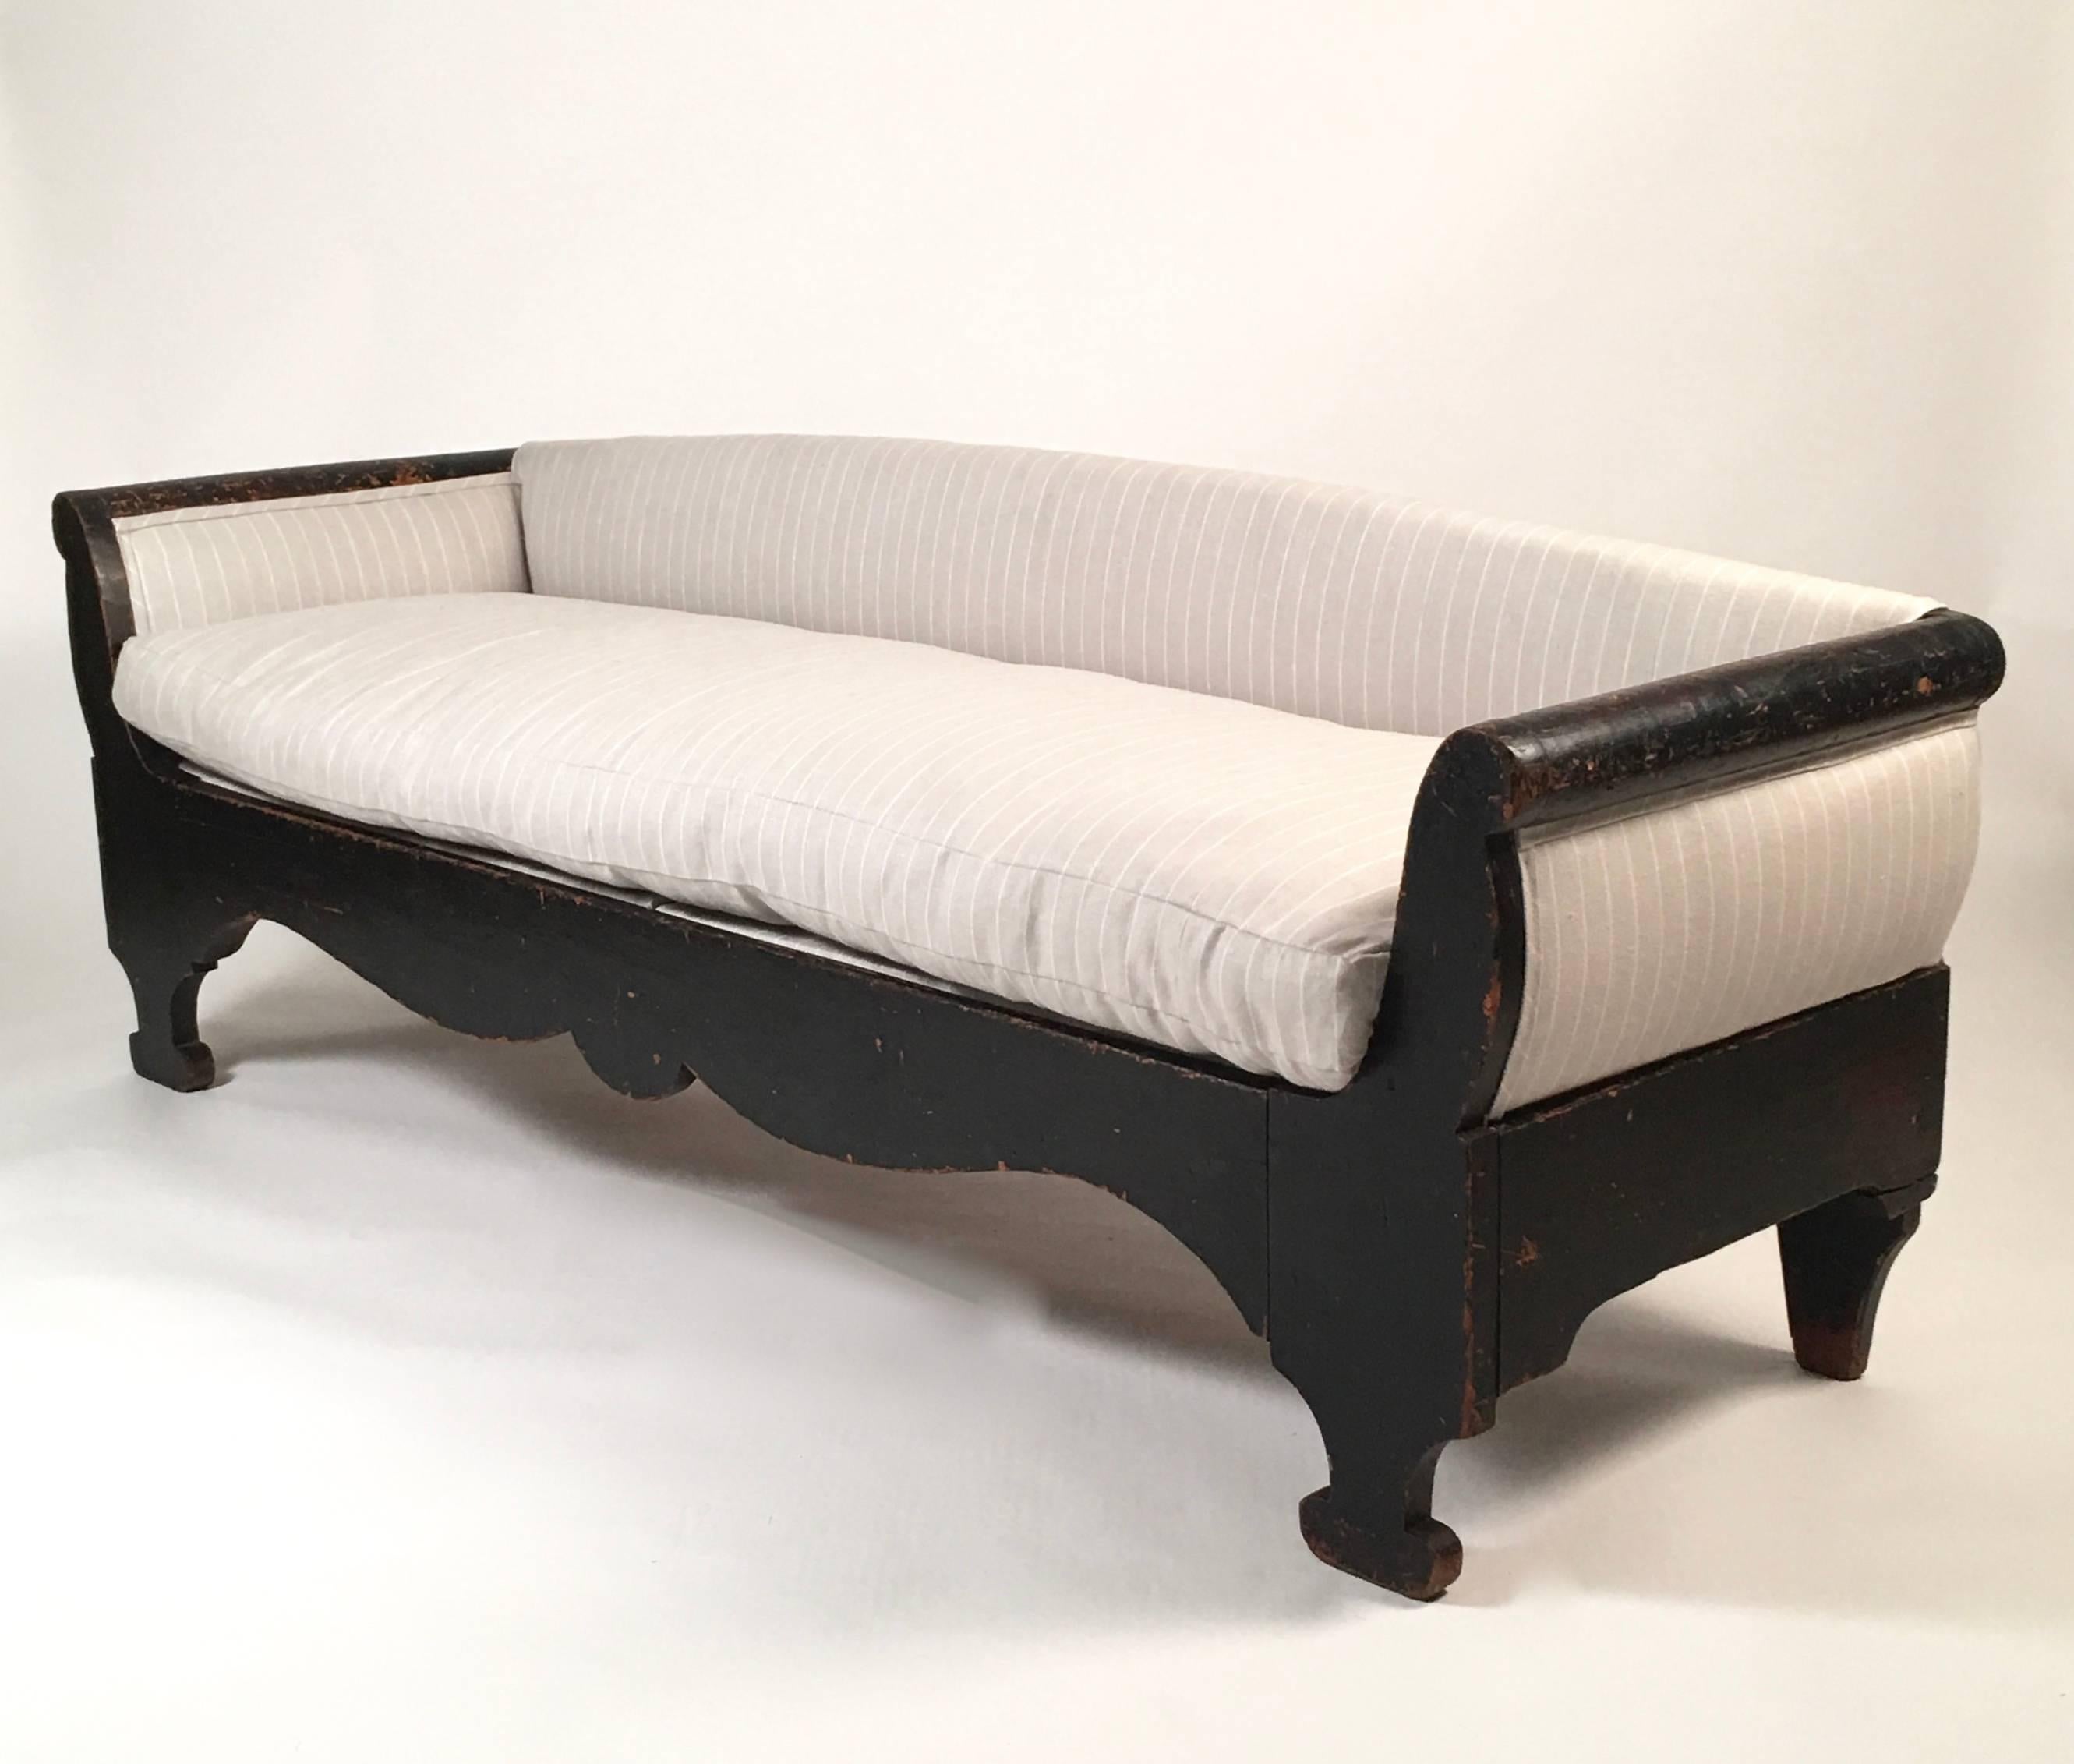 An American country sofa, or upholstered bench, of unusual, wonderfully sculptural form, in black painted wood with scrolled arms and scalloped front rail, raised on compressed oval feet. This sofa has been newly reupholstered in a high quality